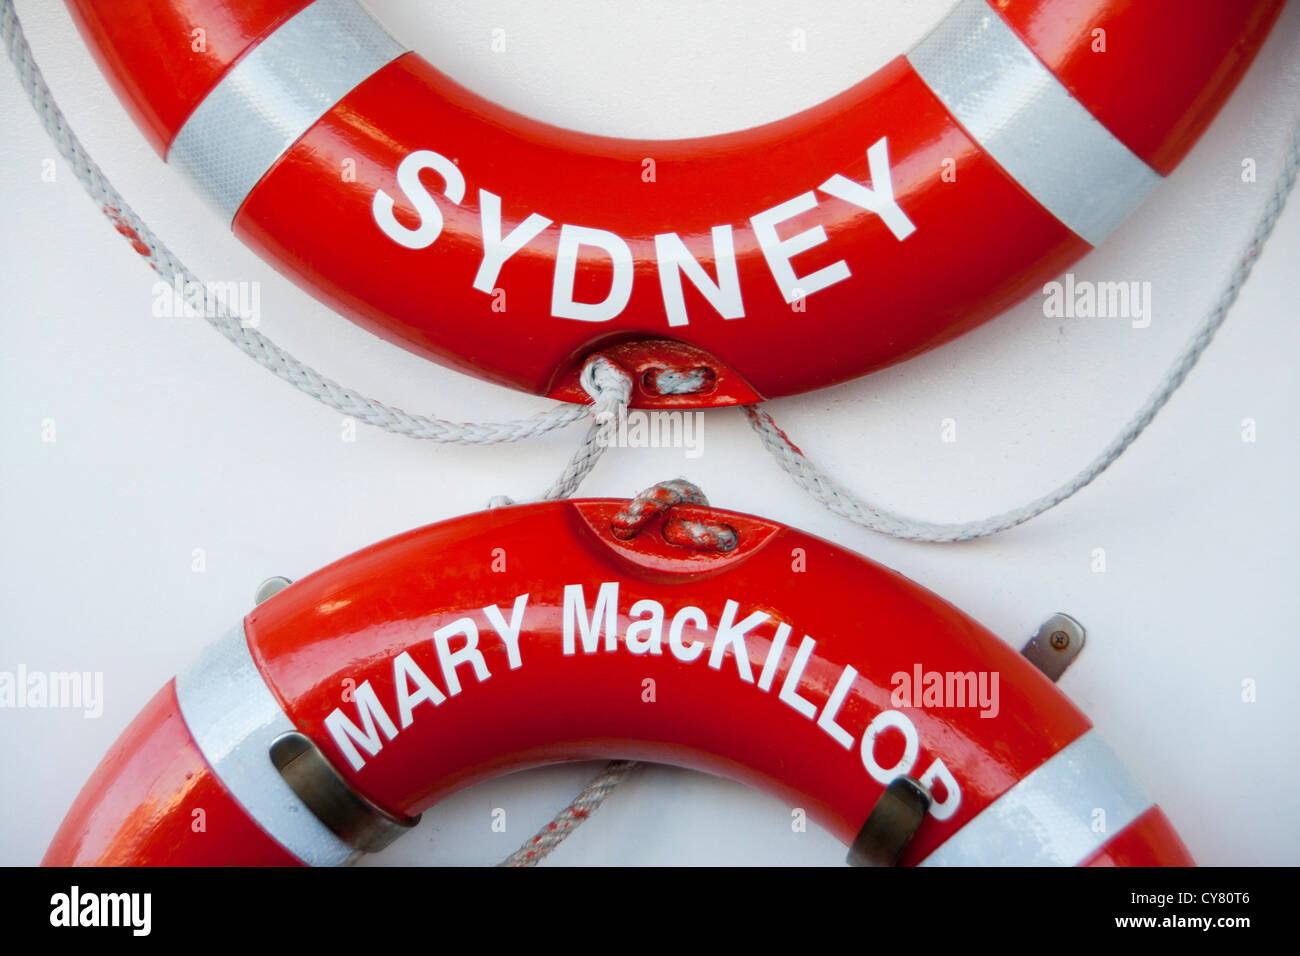 Life belts on Mary MacKillop ferry in Sydney Ferry is named after Australia's first saint Sydney New South Wales (NSW) Australia Stock Photo